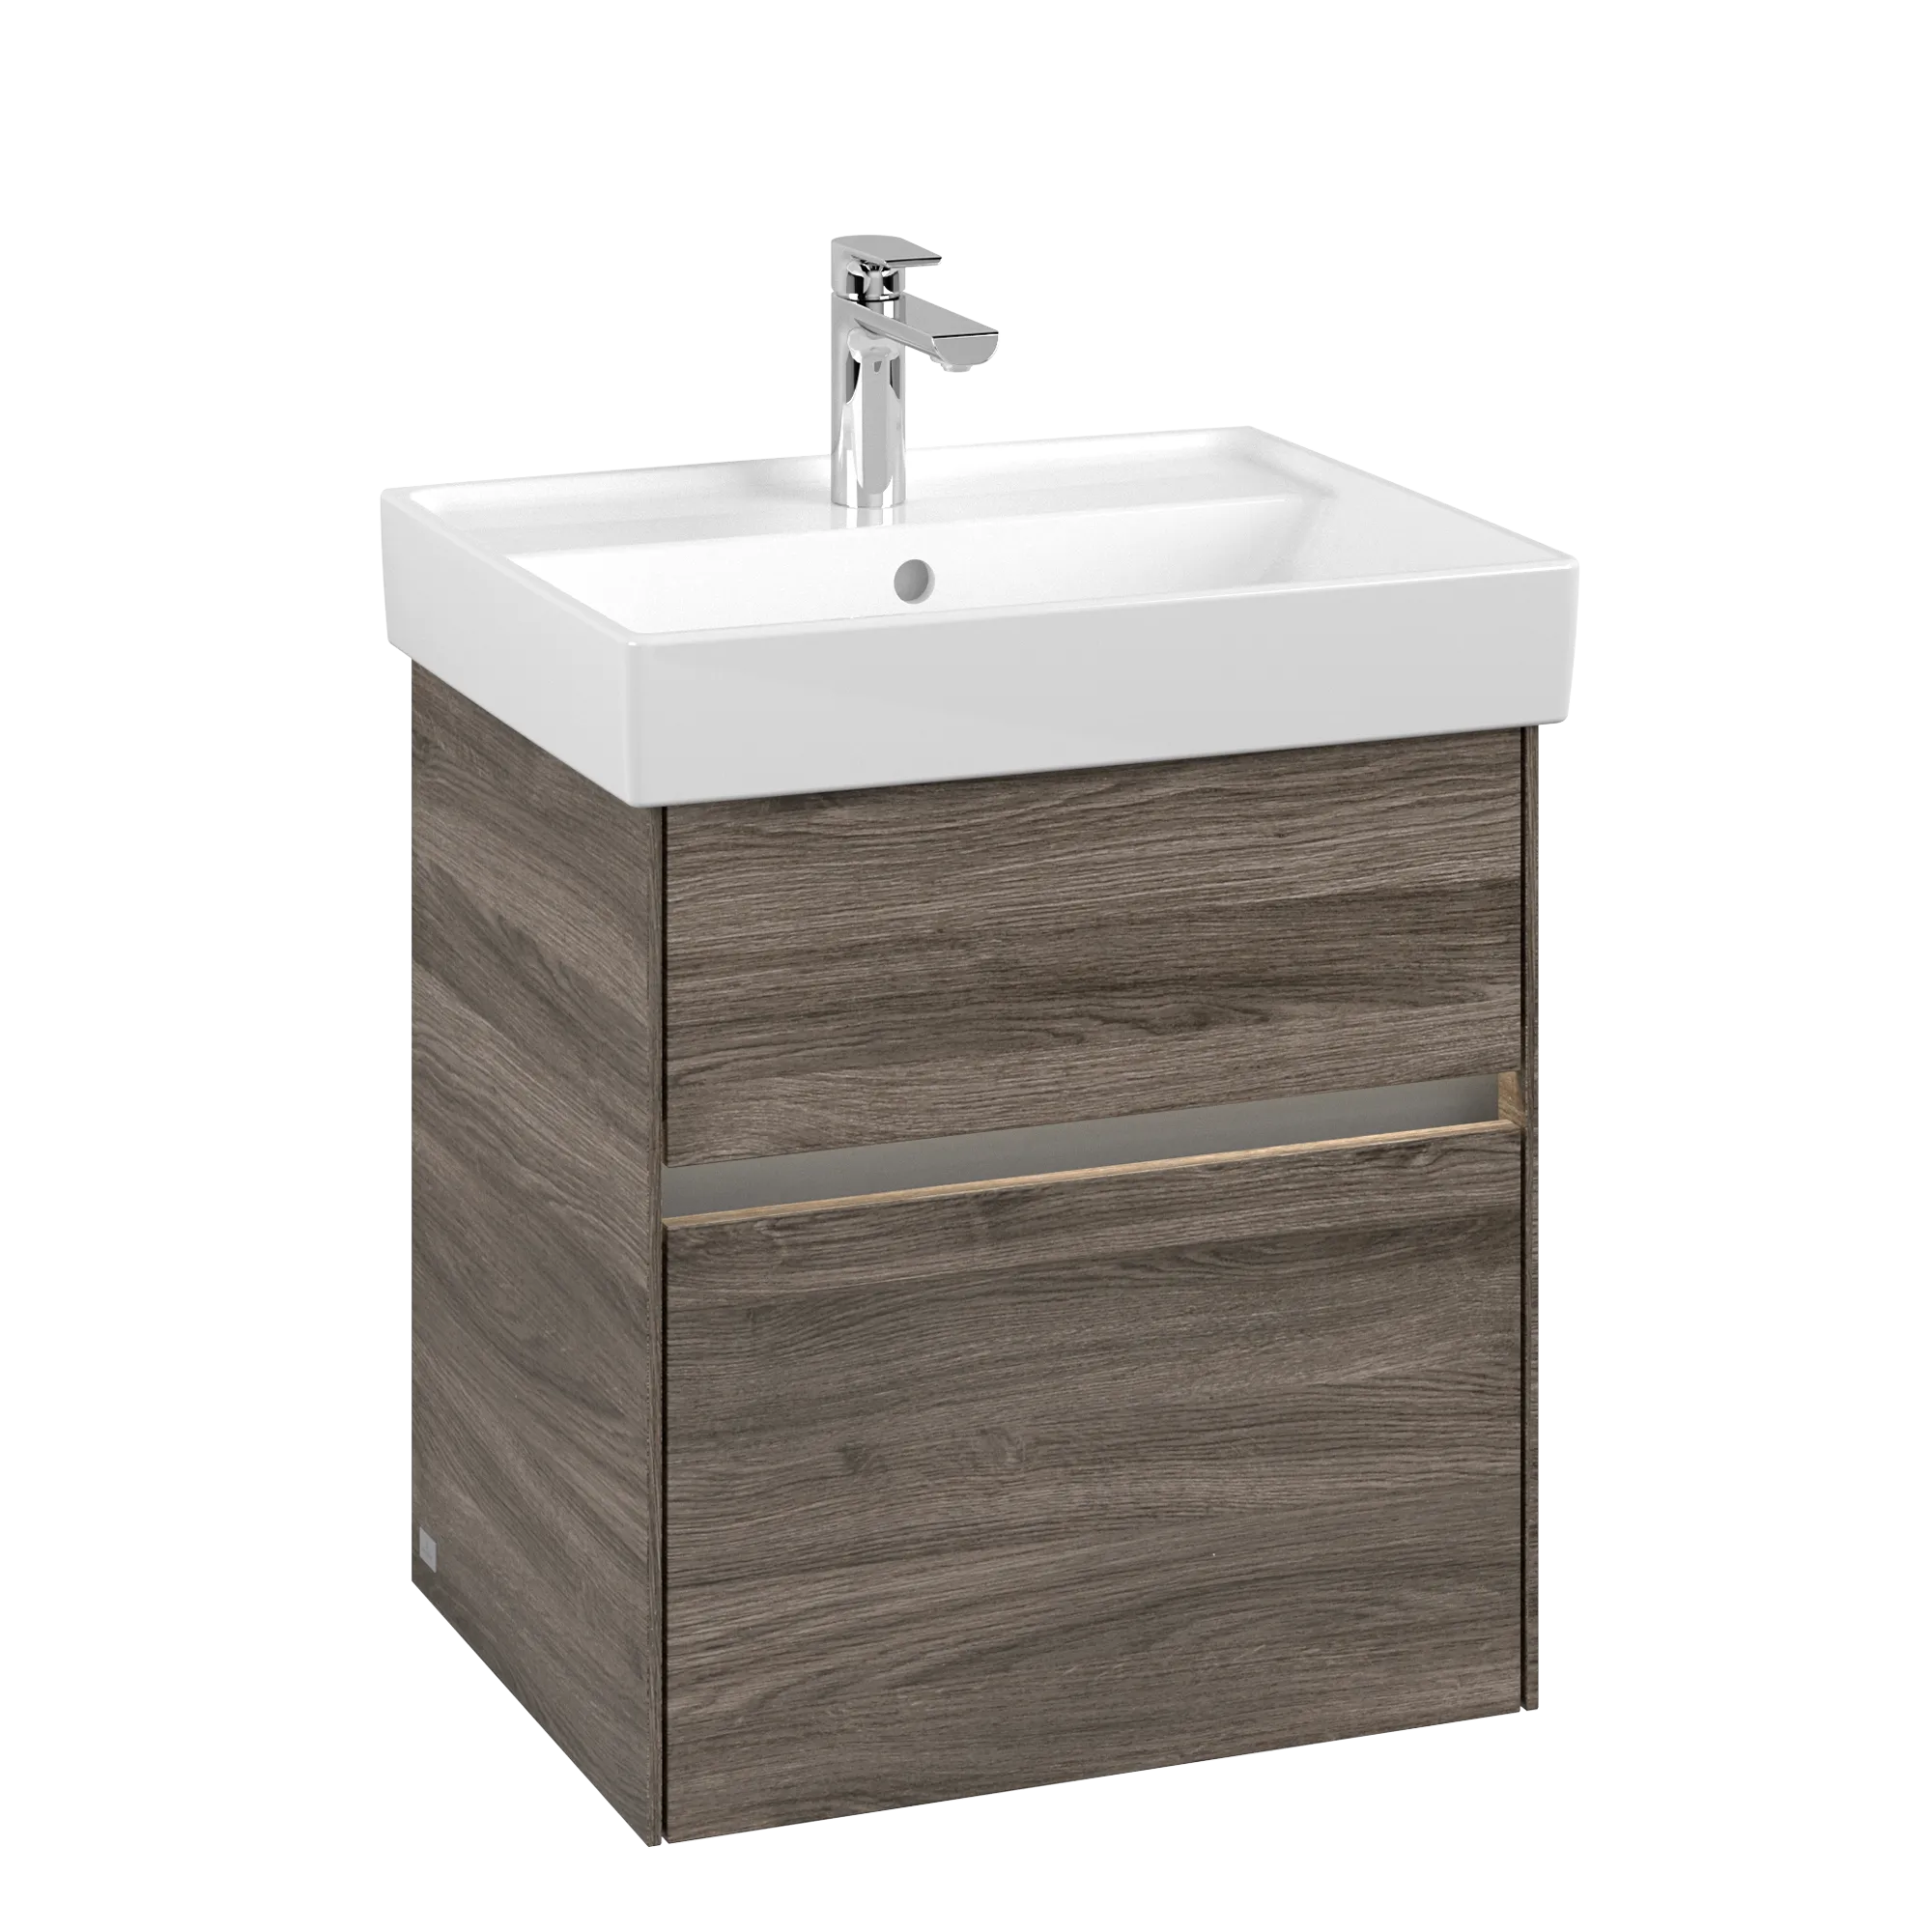 VILLEROY BOCH Collaro Vanity unit, with lighting, 2 pull-out compartments, 510 x 546 x 414 mm, Stone Oak #C007B0RK resmi